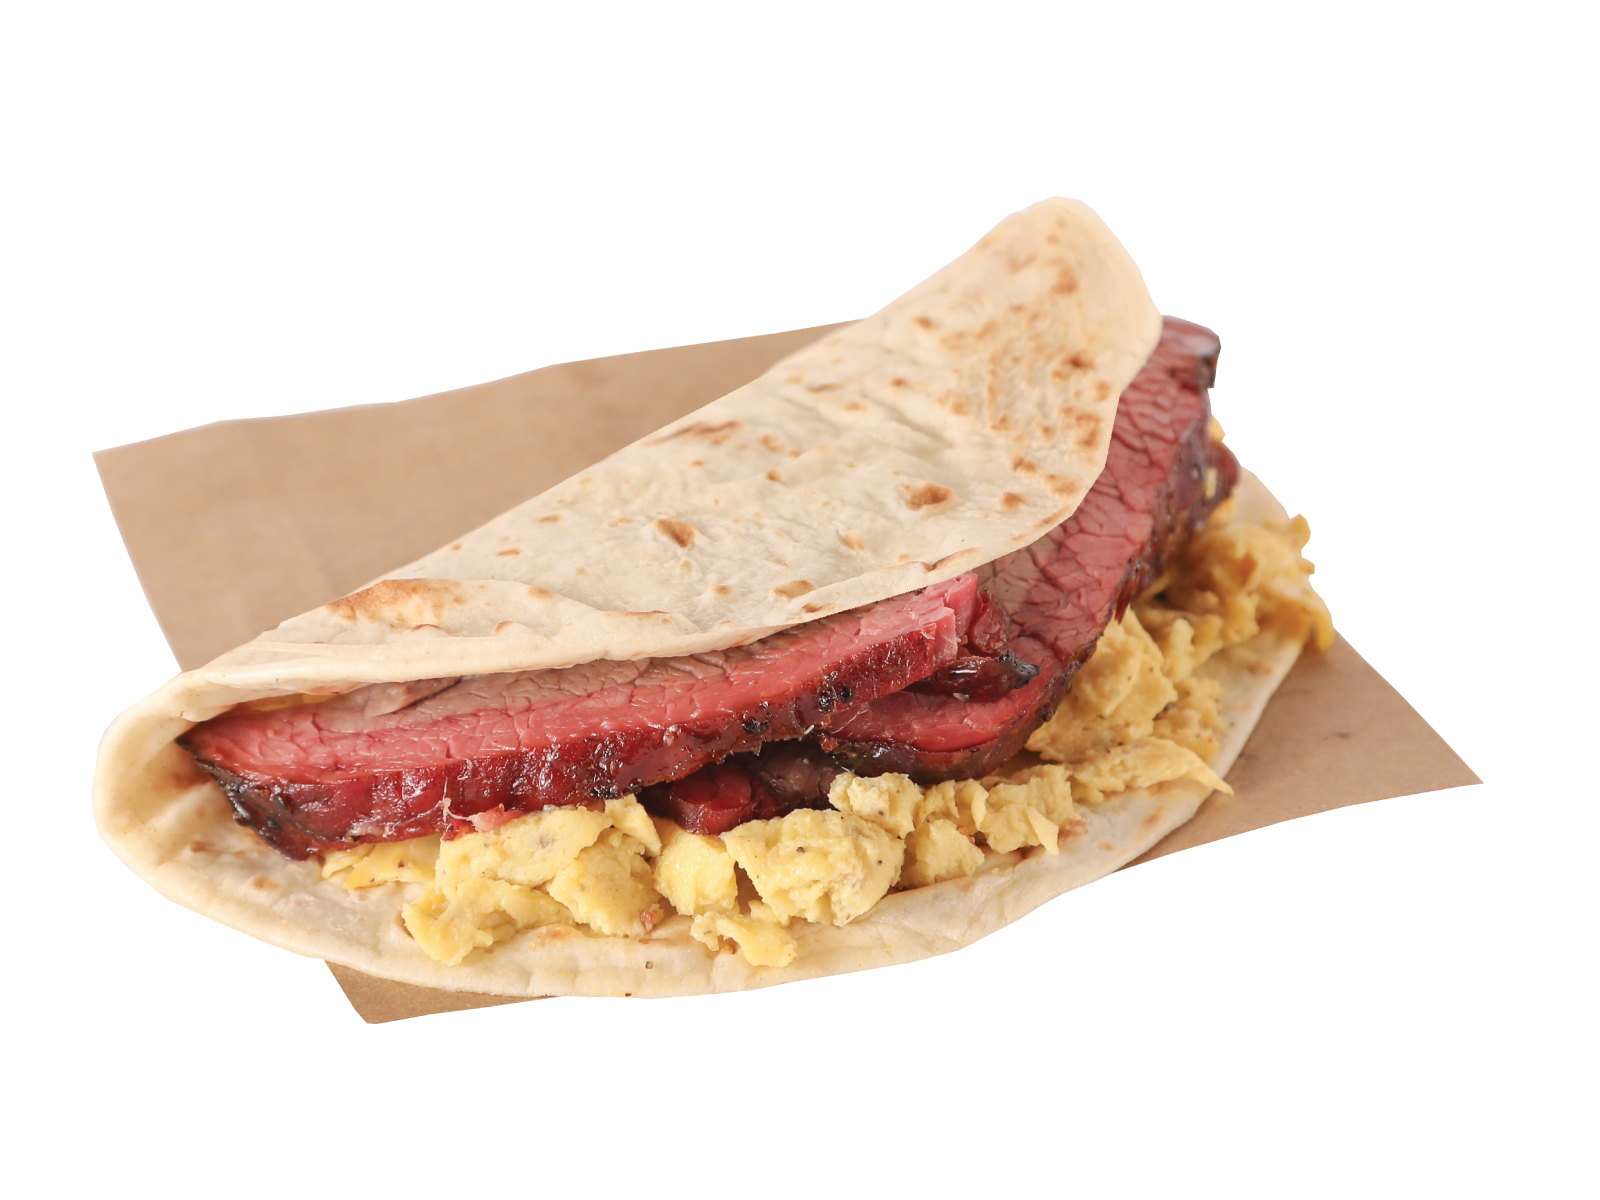 Brisket and Egg Taco on brown paper